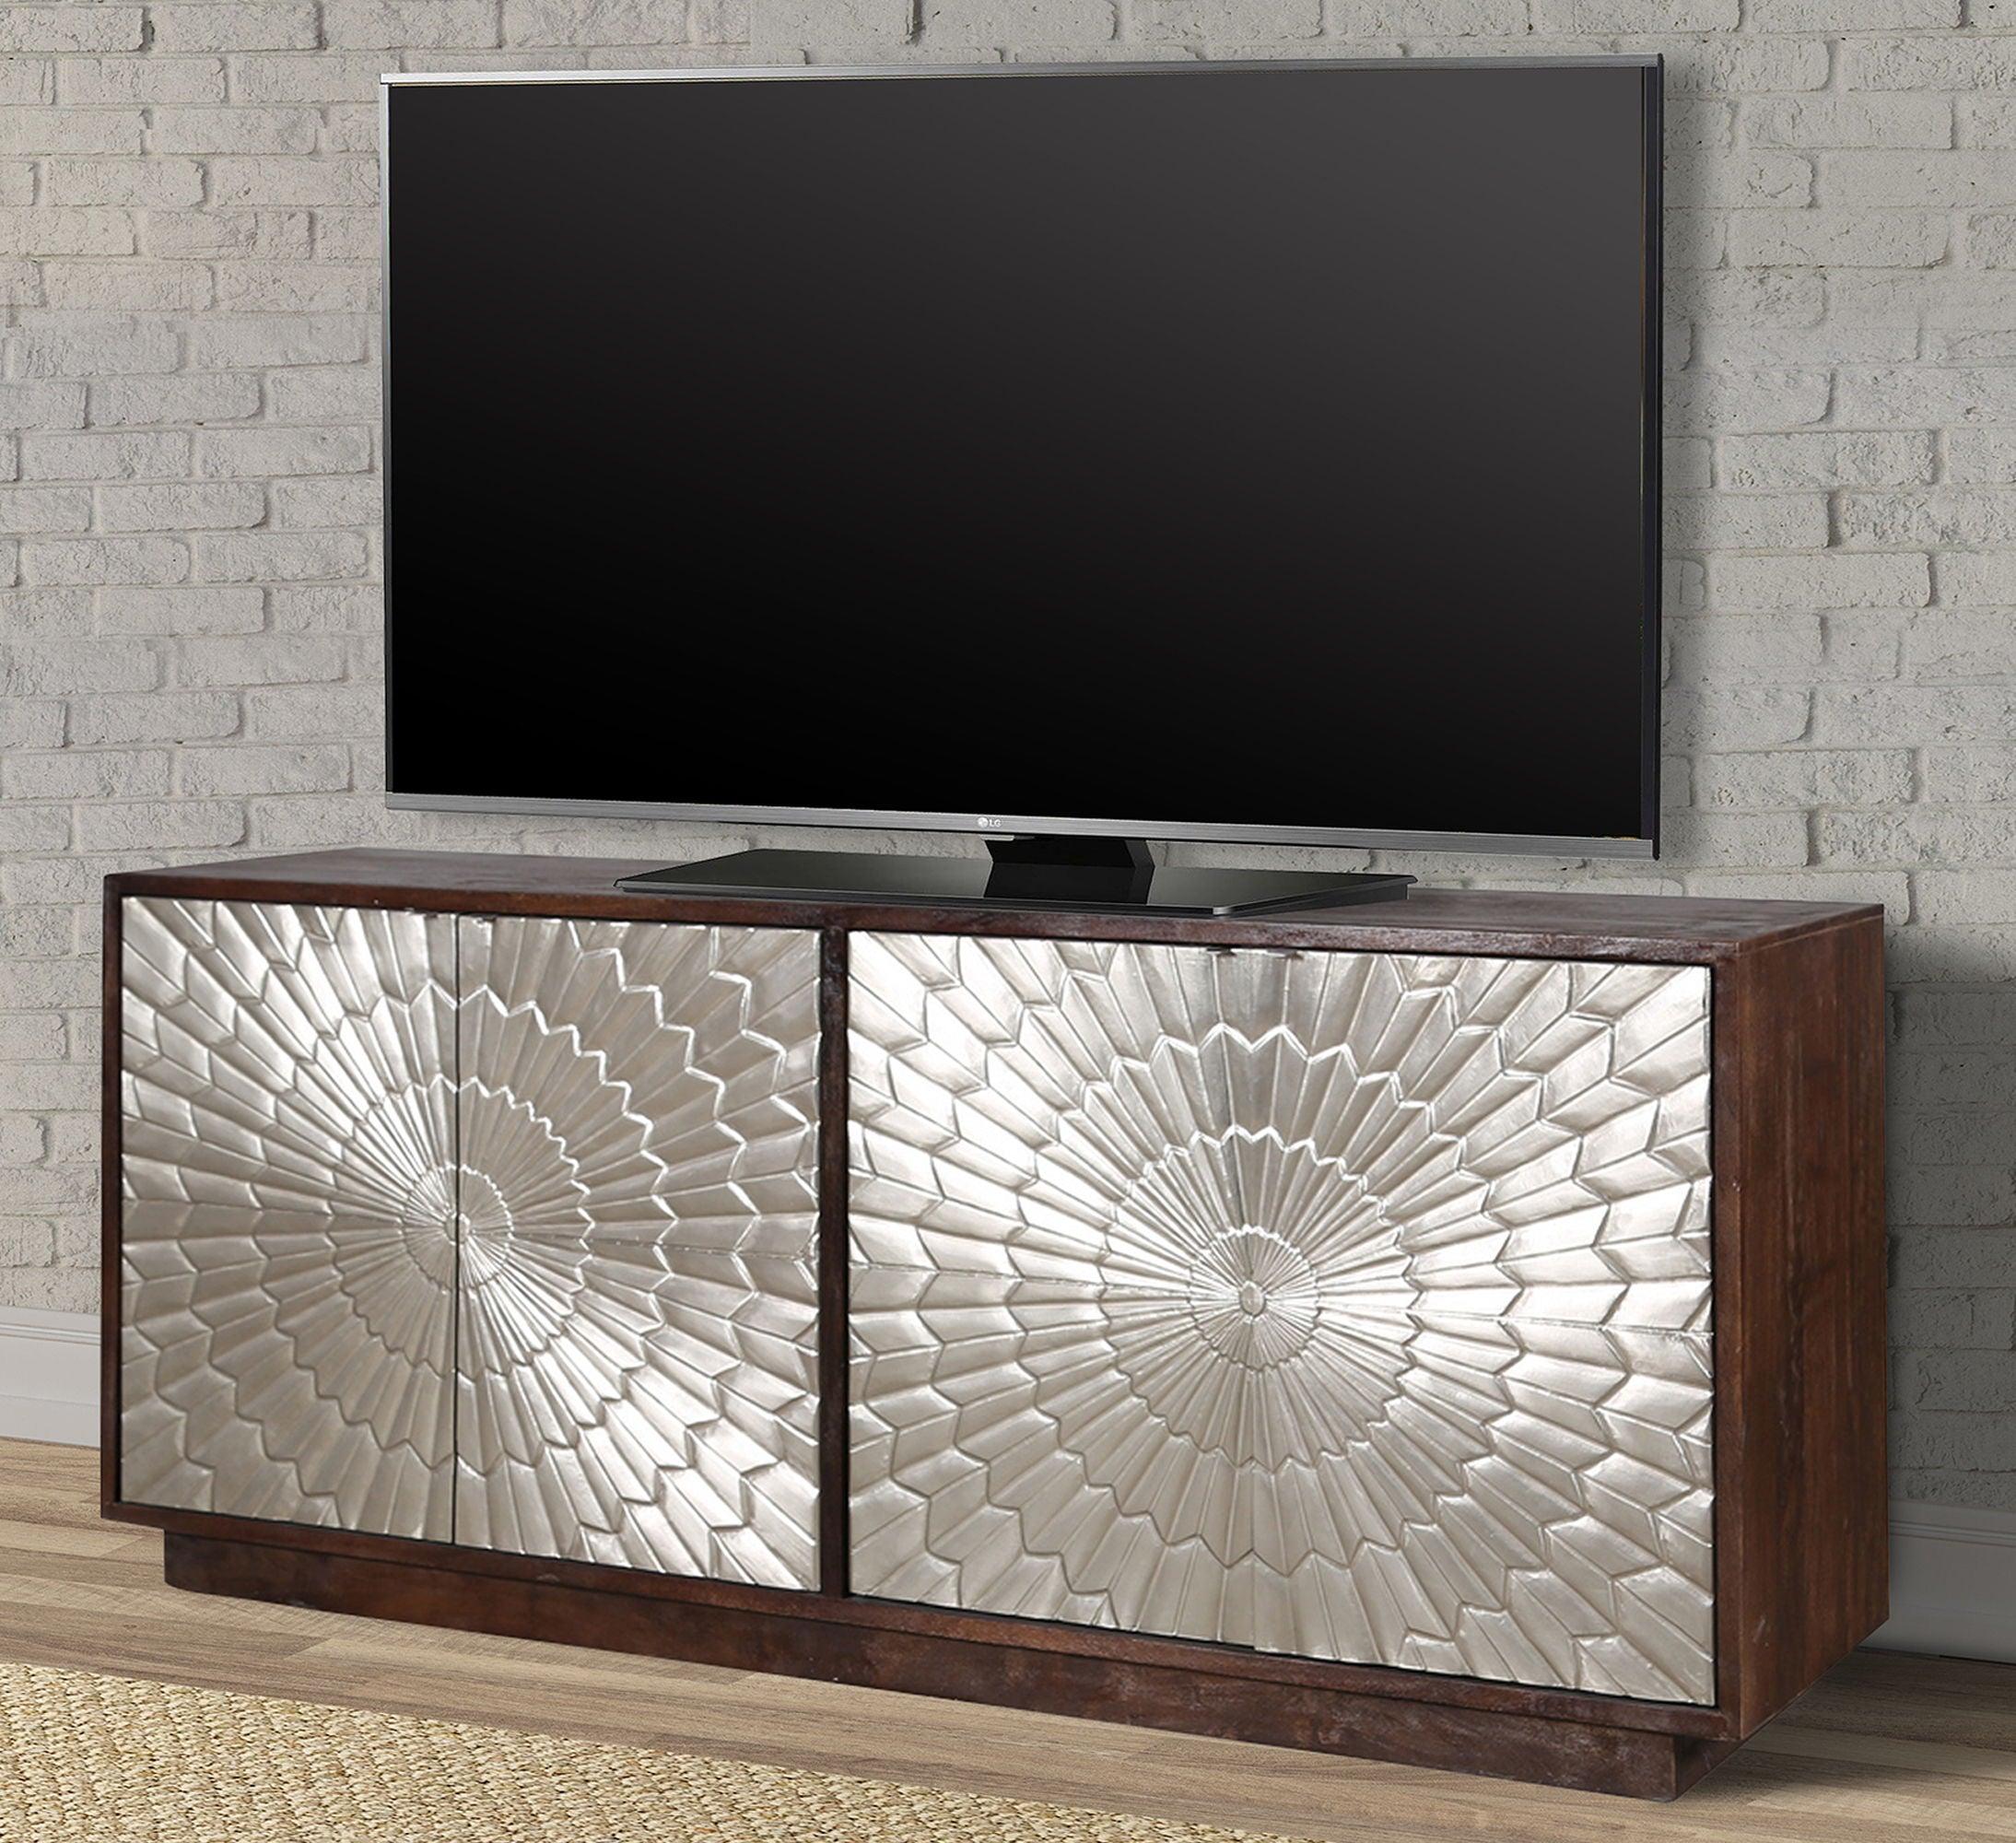 Parker Living - Crossings Palace - TV Console - Sliver Clad - 5th Avenue Furniture